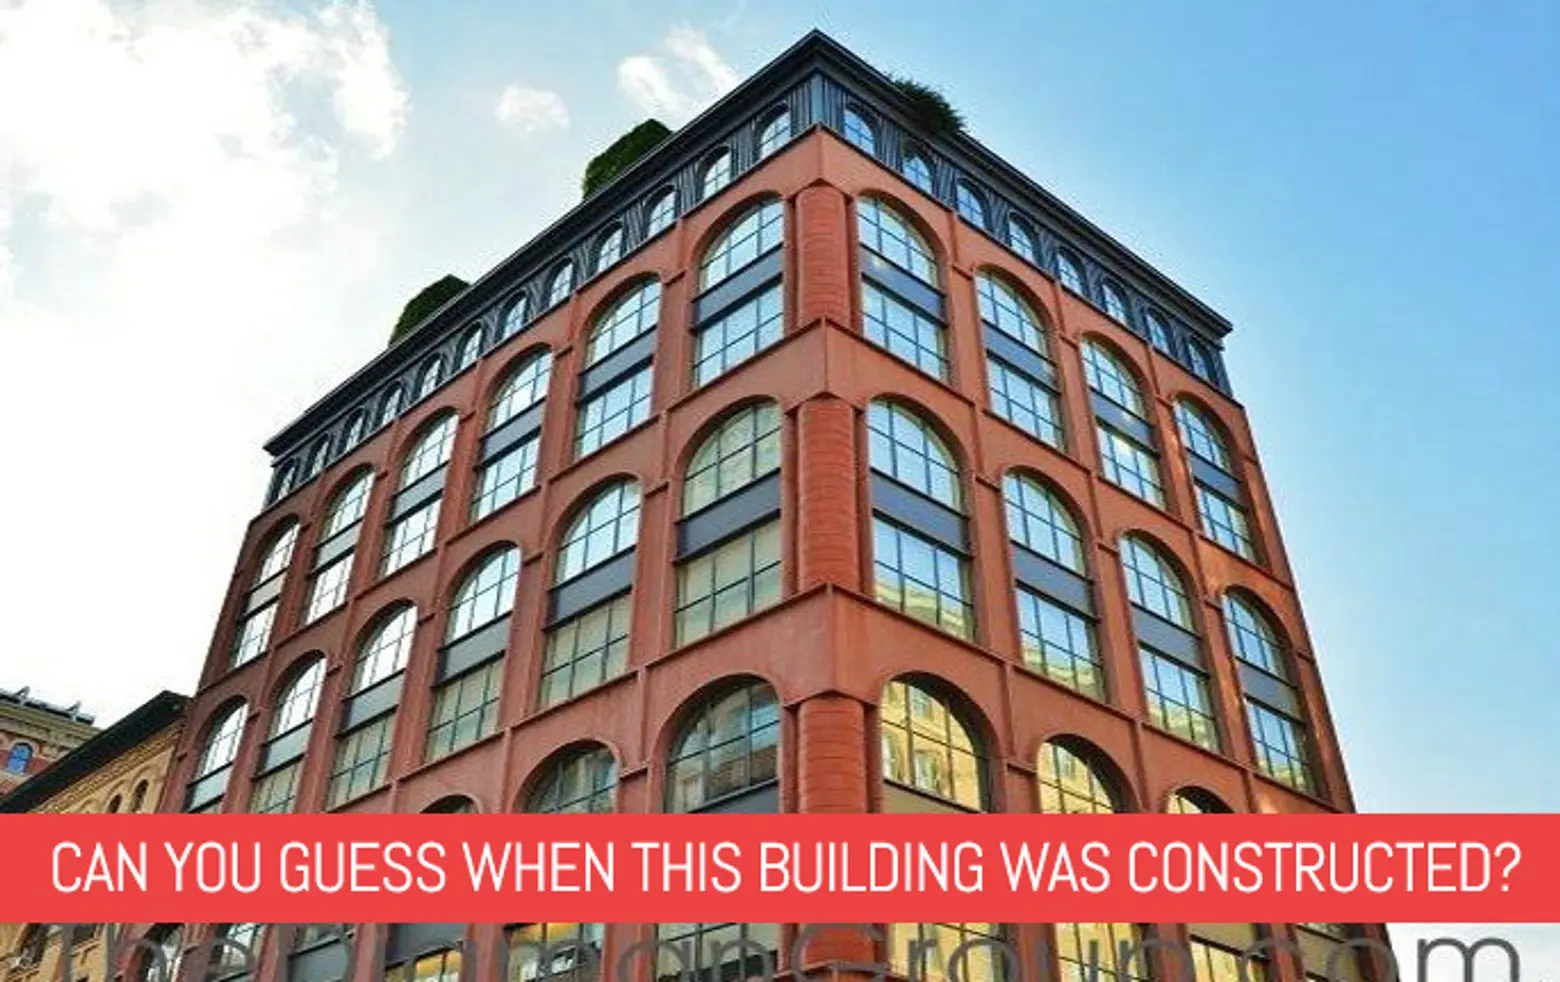 QUIZ: Can You Guess When This Building Was Constructed?